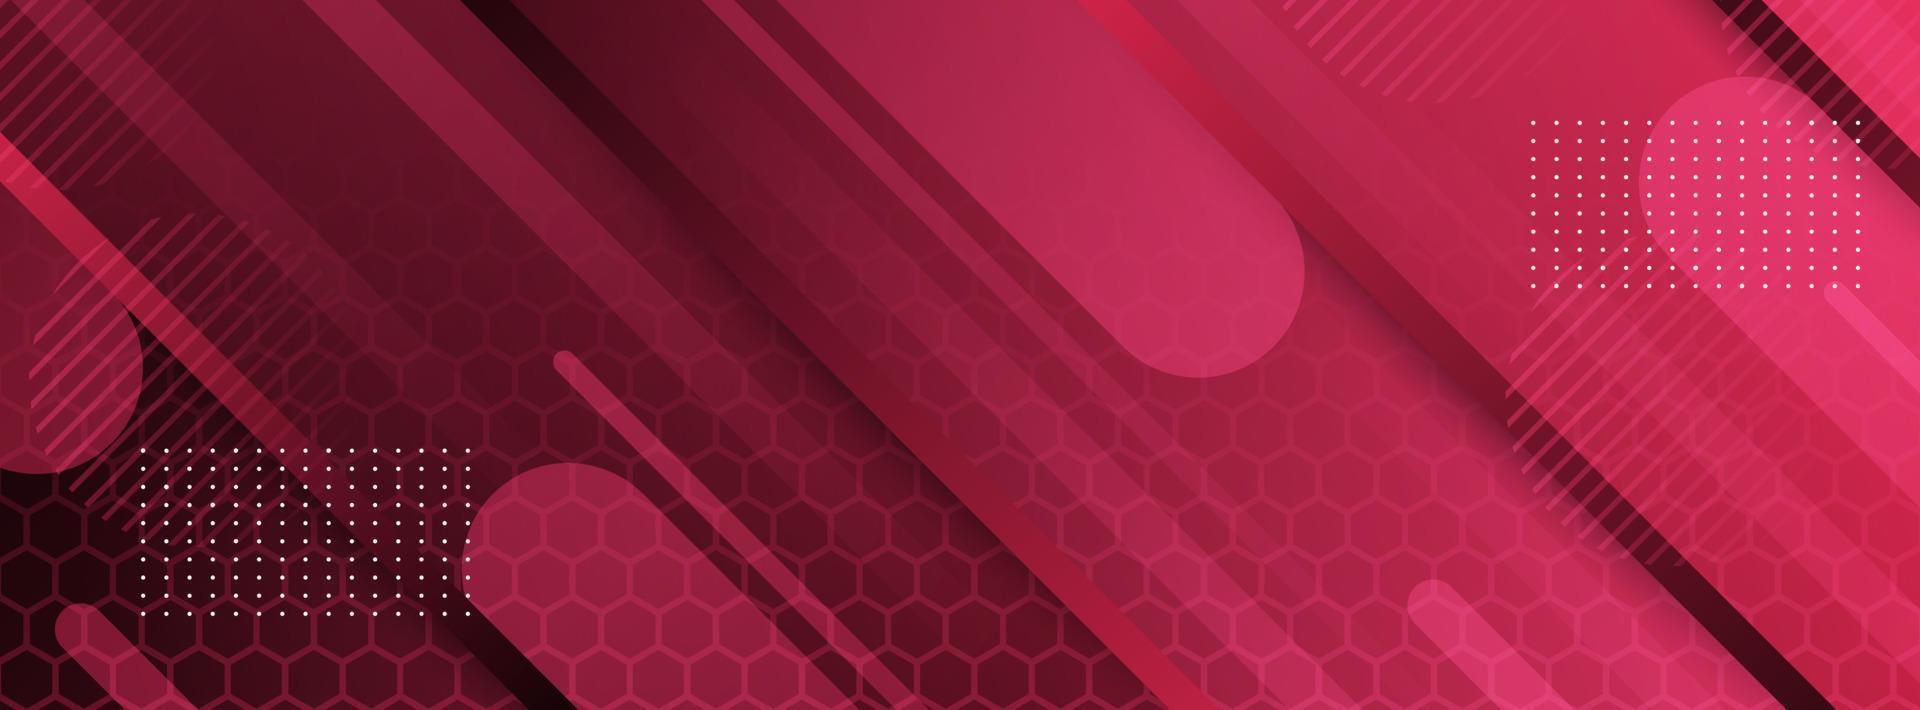 banner background. full color. gradient pink.pattern hexagonal .shapes .eps 10 vector